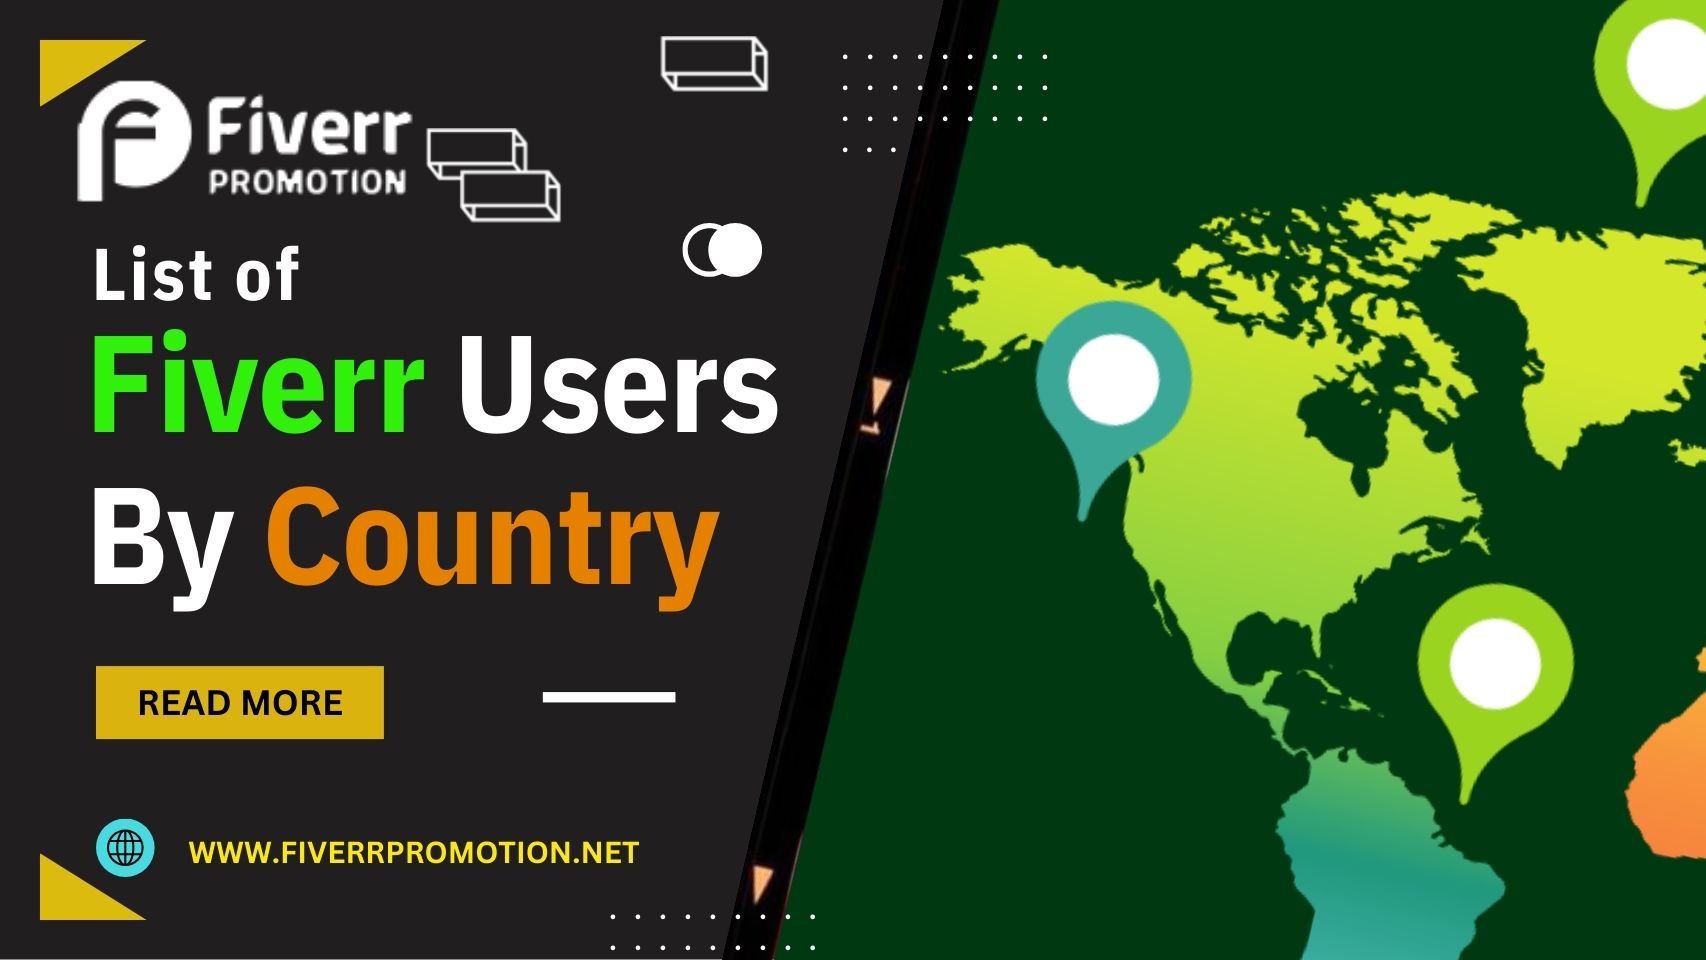 List of Fiverr Users by Country